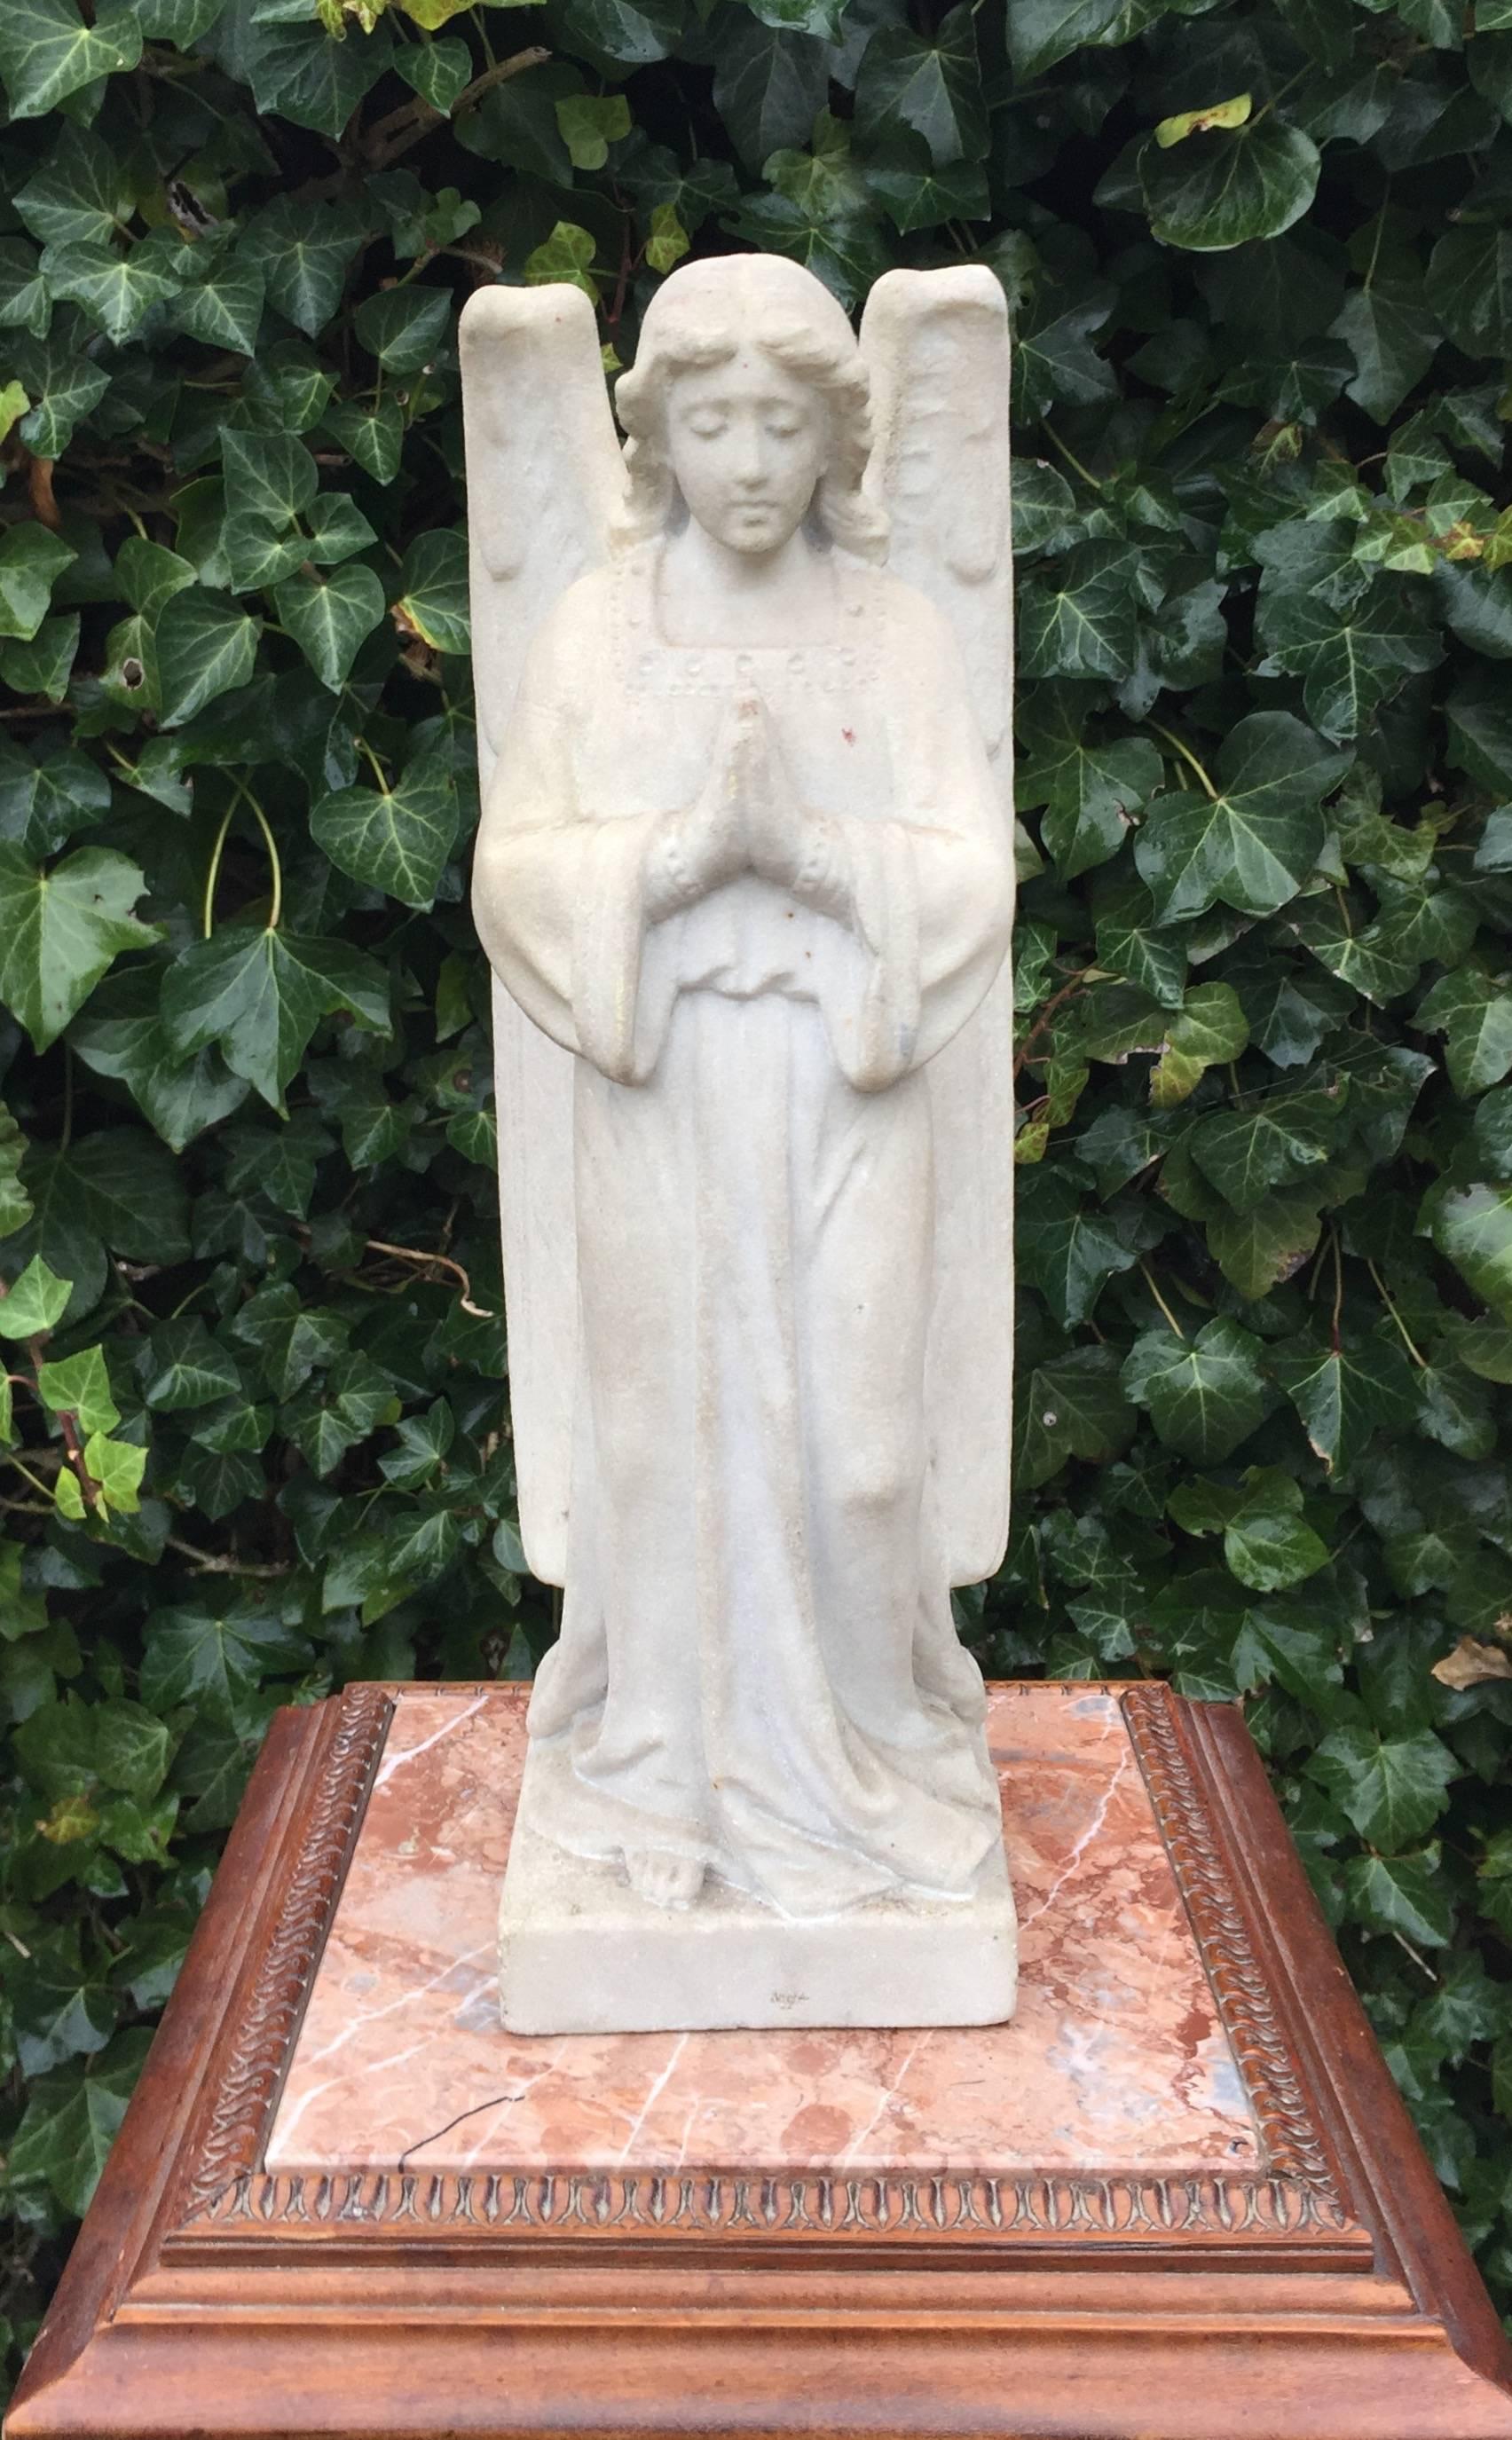 Antique solid marble standing angel in prayer.

This rare angel is entirely hand-carved out of marble. The arched wings, her beautifully draped cloth and her lovely, serene face are some of the elegant features that make this sculpture a joy to